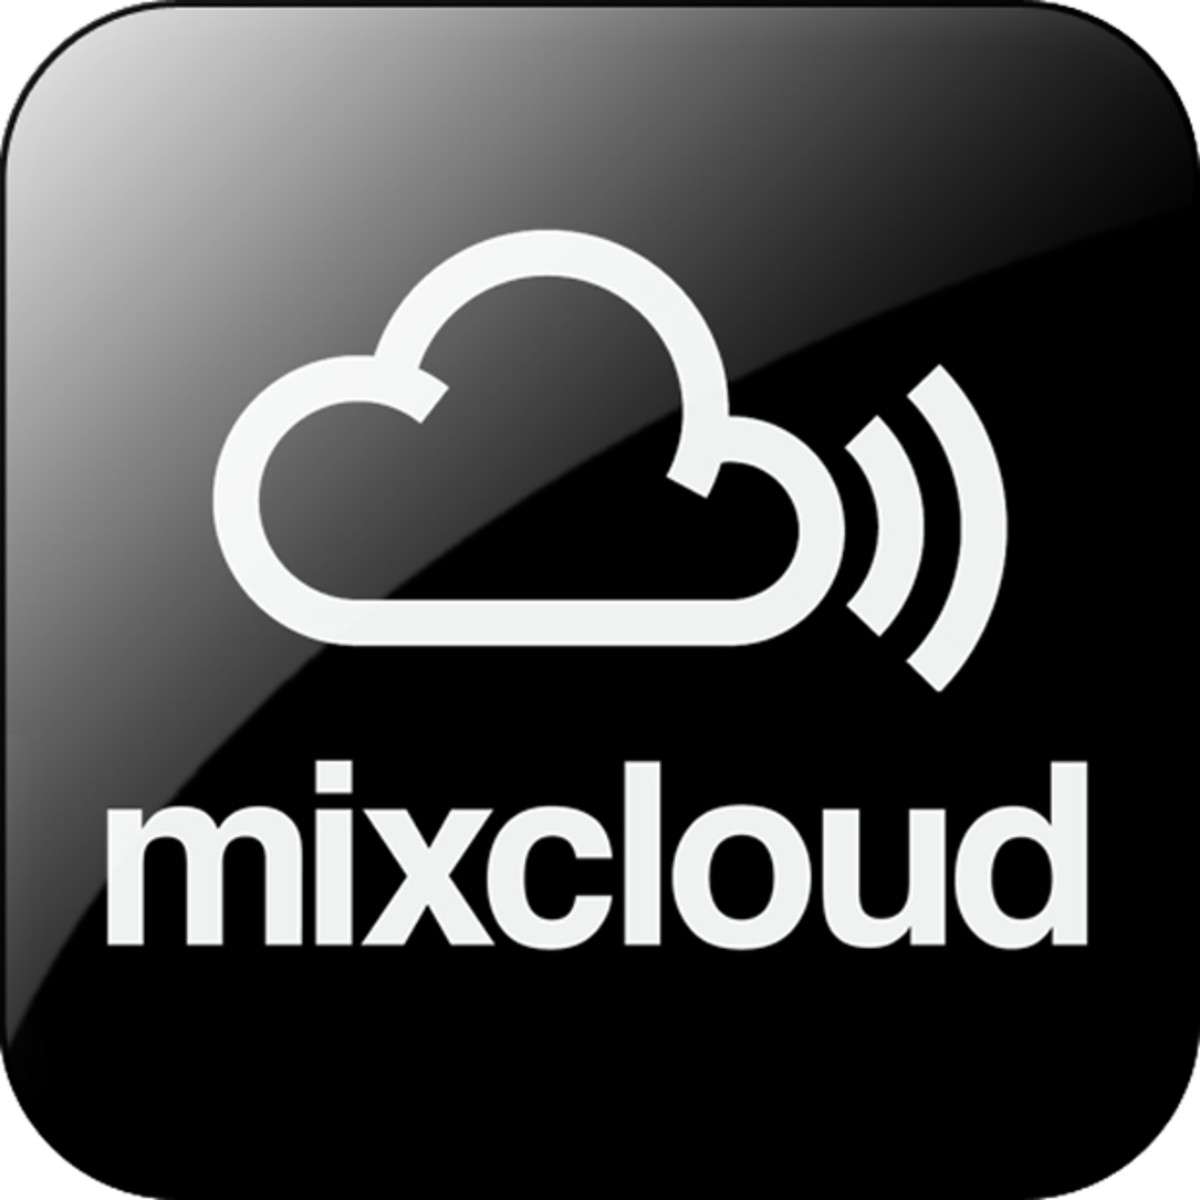 I will make a promotion campaign for your mixcloud mix